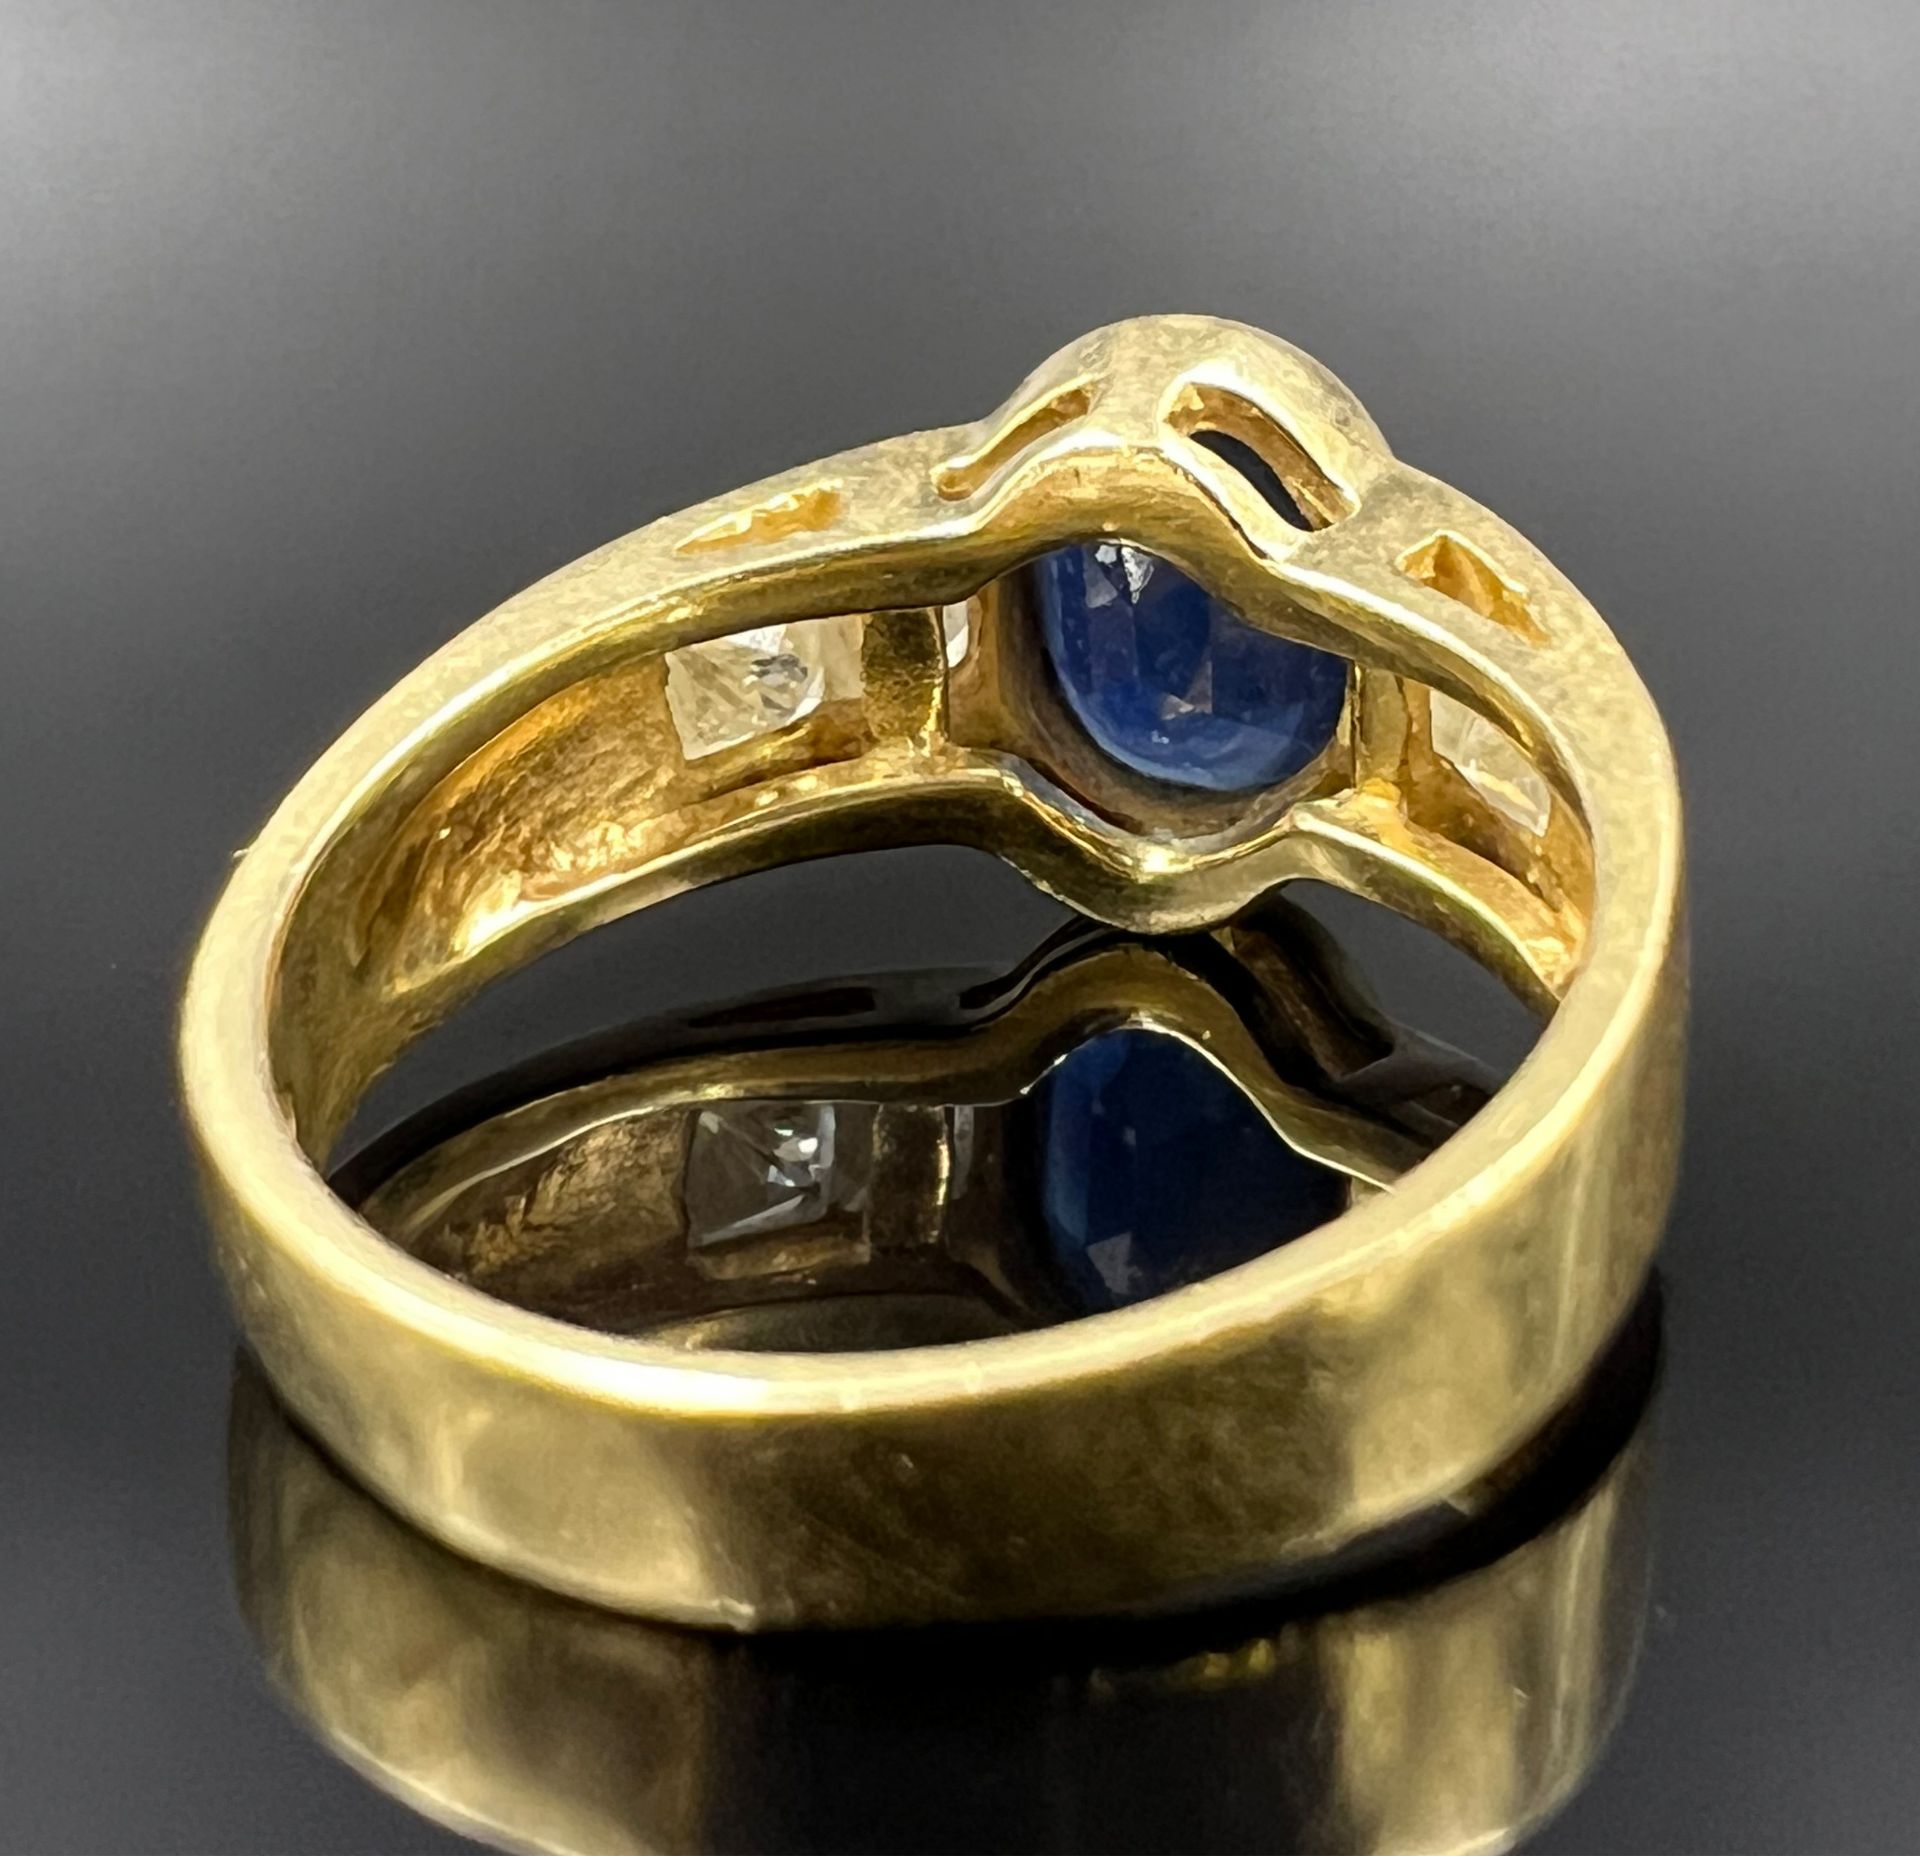 Ladies' ring. 750 yellow gold. 1 blue colored stone and 4 diamonds. - Image 3 of 10